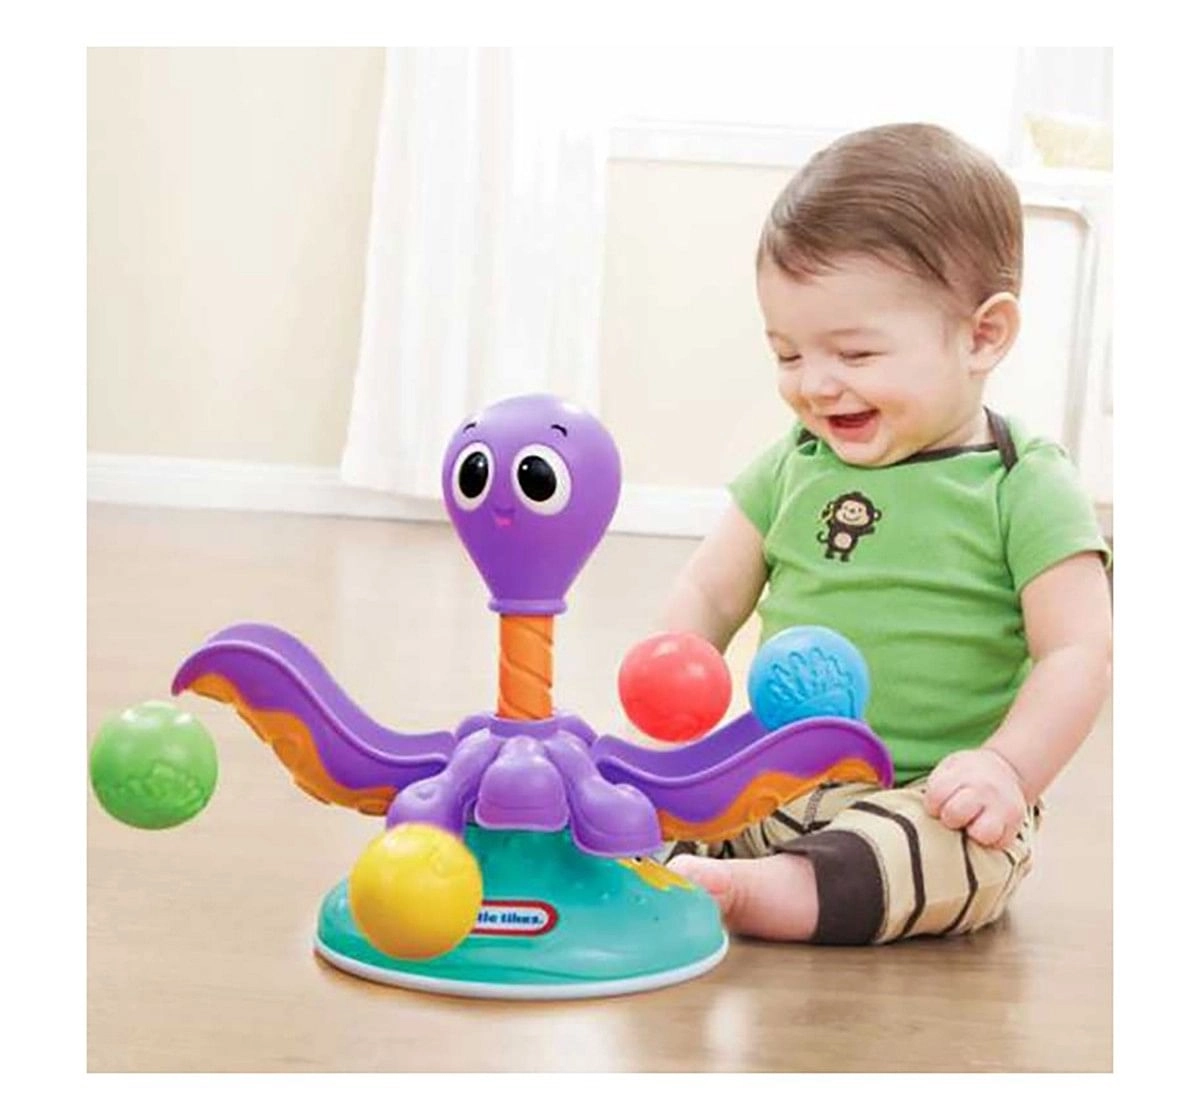 Little Tikes Ball Chase Octopus, Early Learner Toys for Kids age 6M+ 